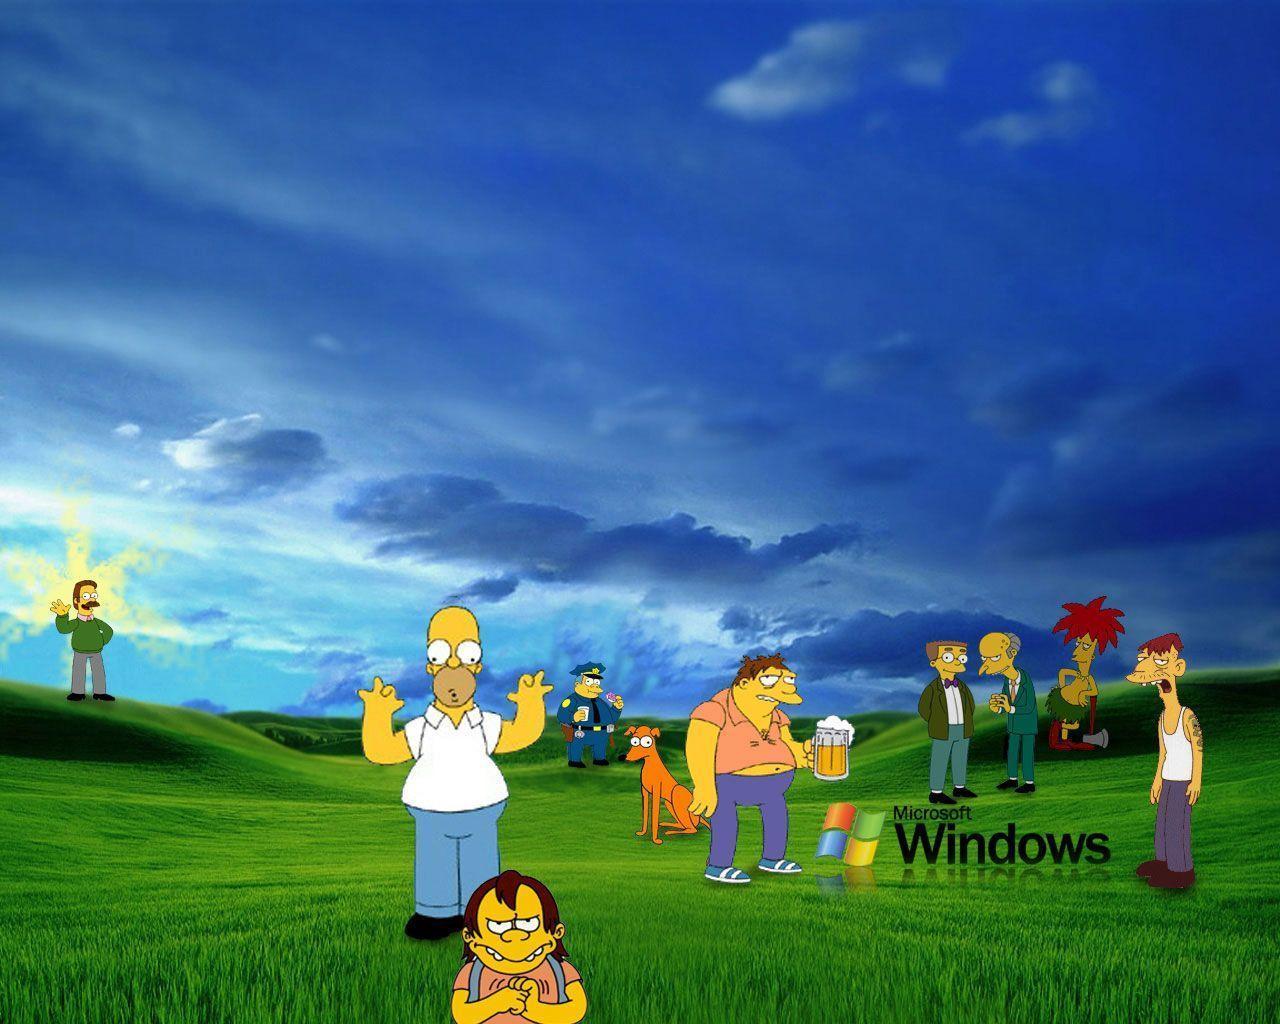 Windows wallpaper with Homer Simpson. My funny world